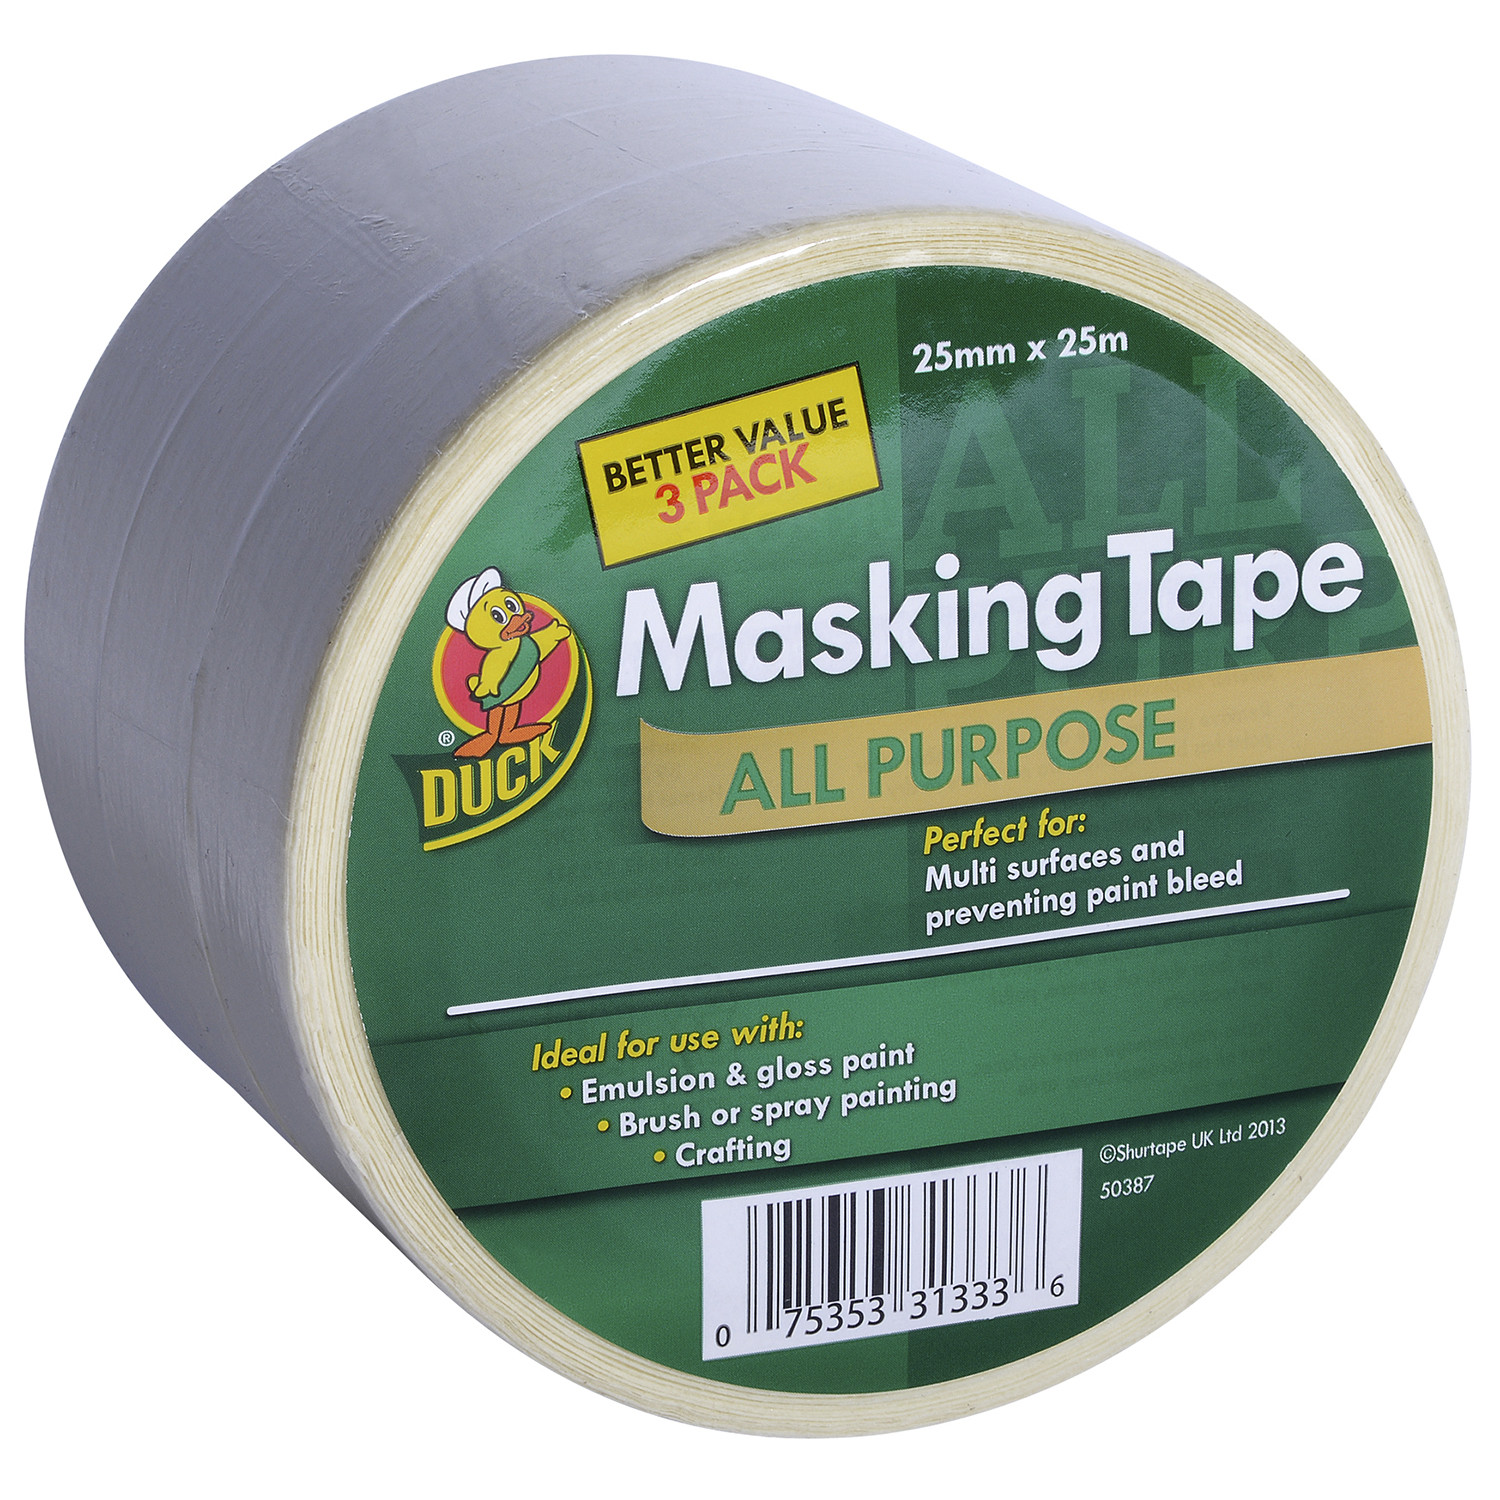 Duck 25mm x 25m All Purpose Masking Tape 3 Pack Image 2